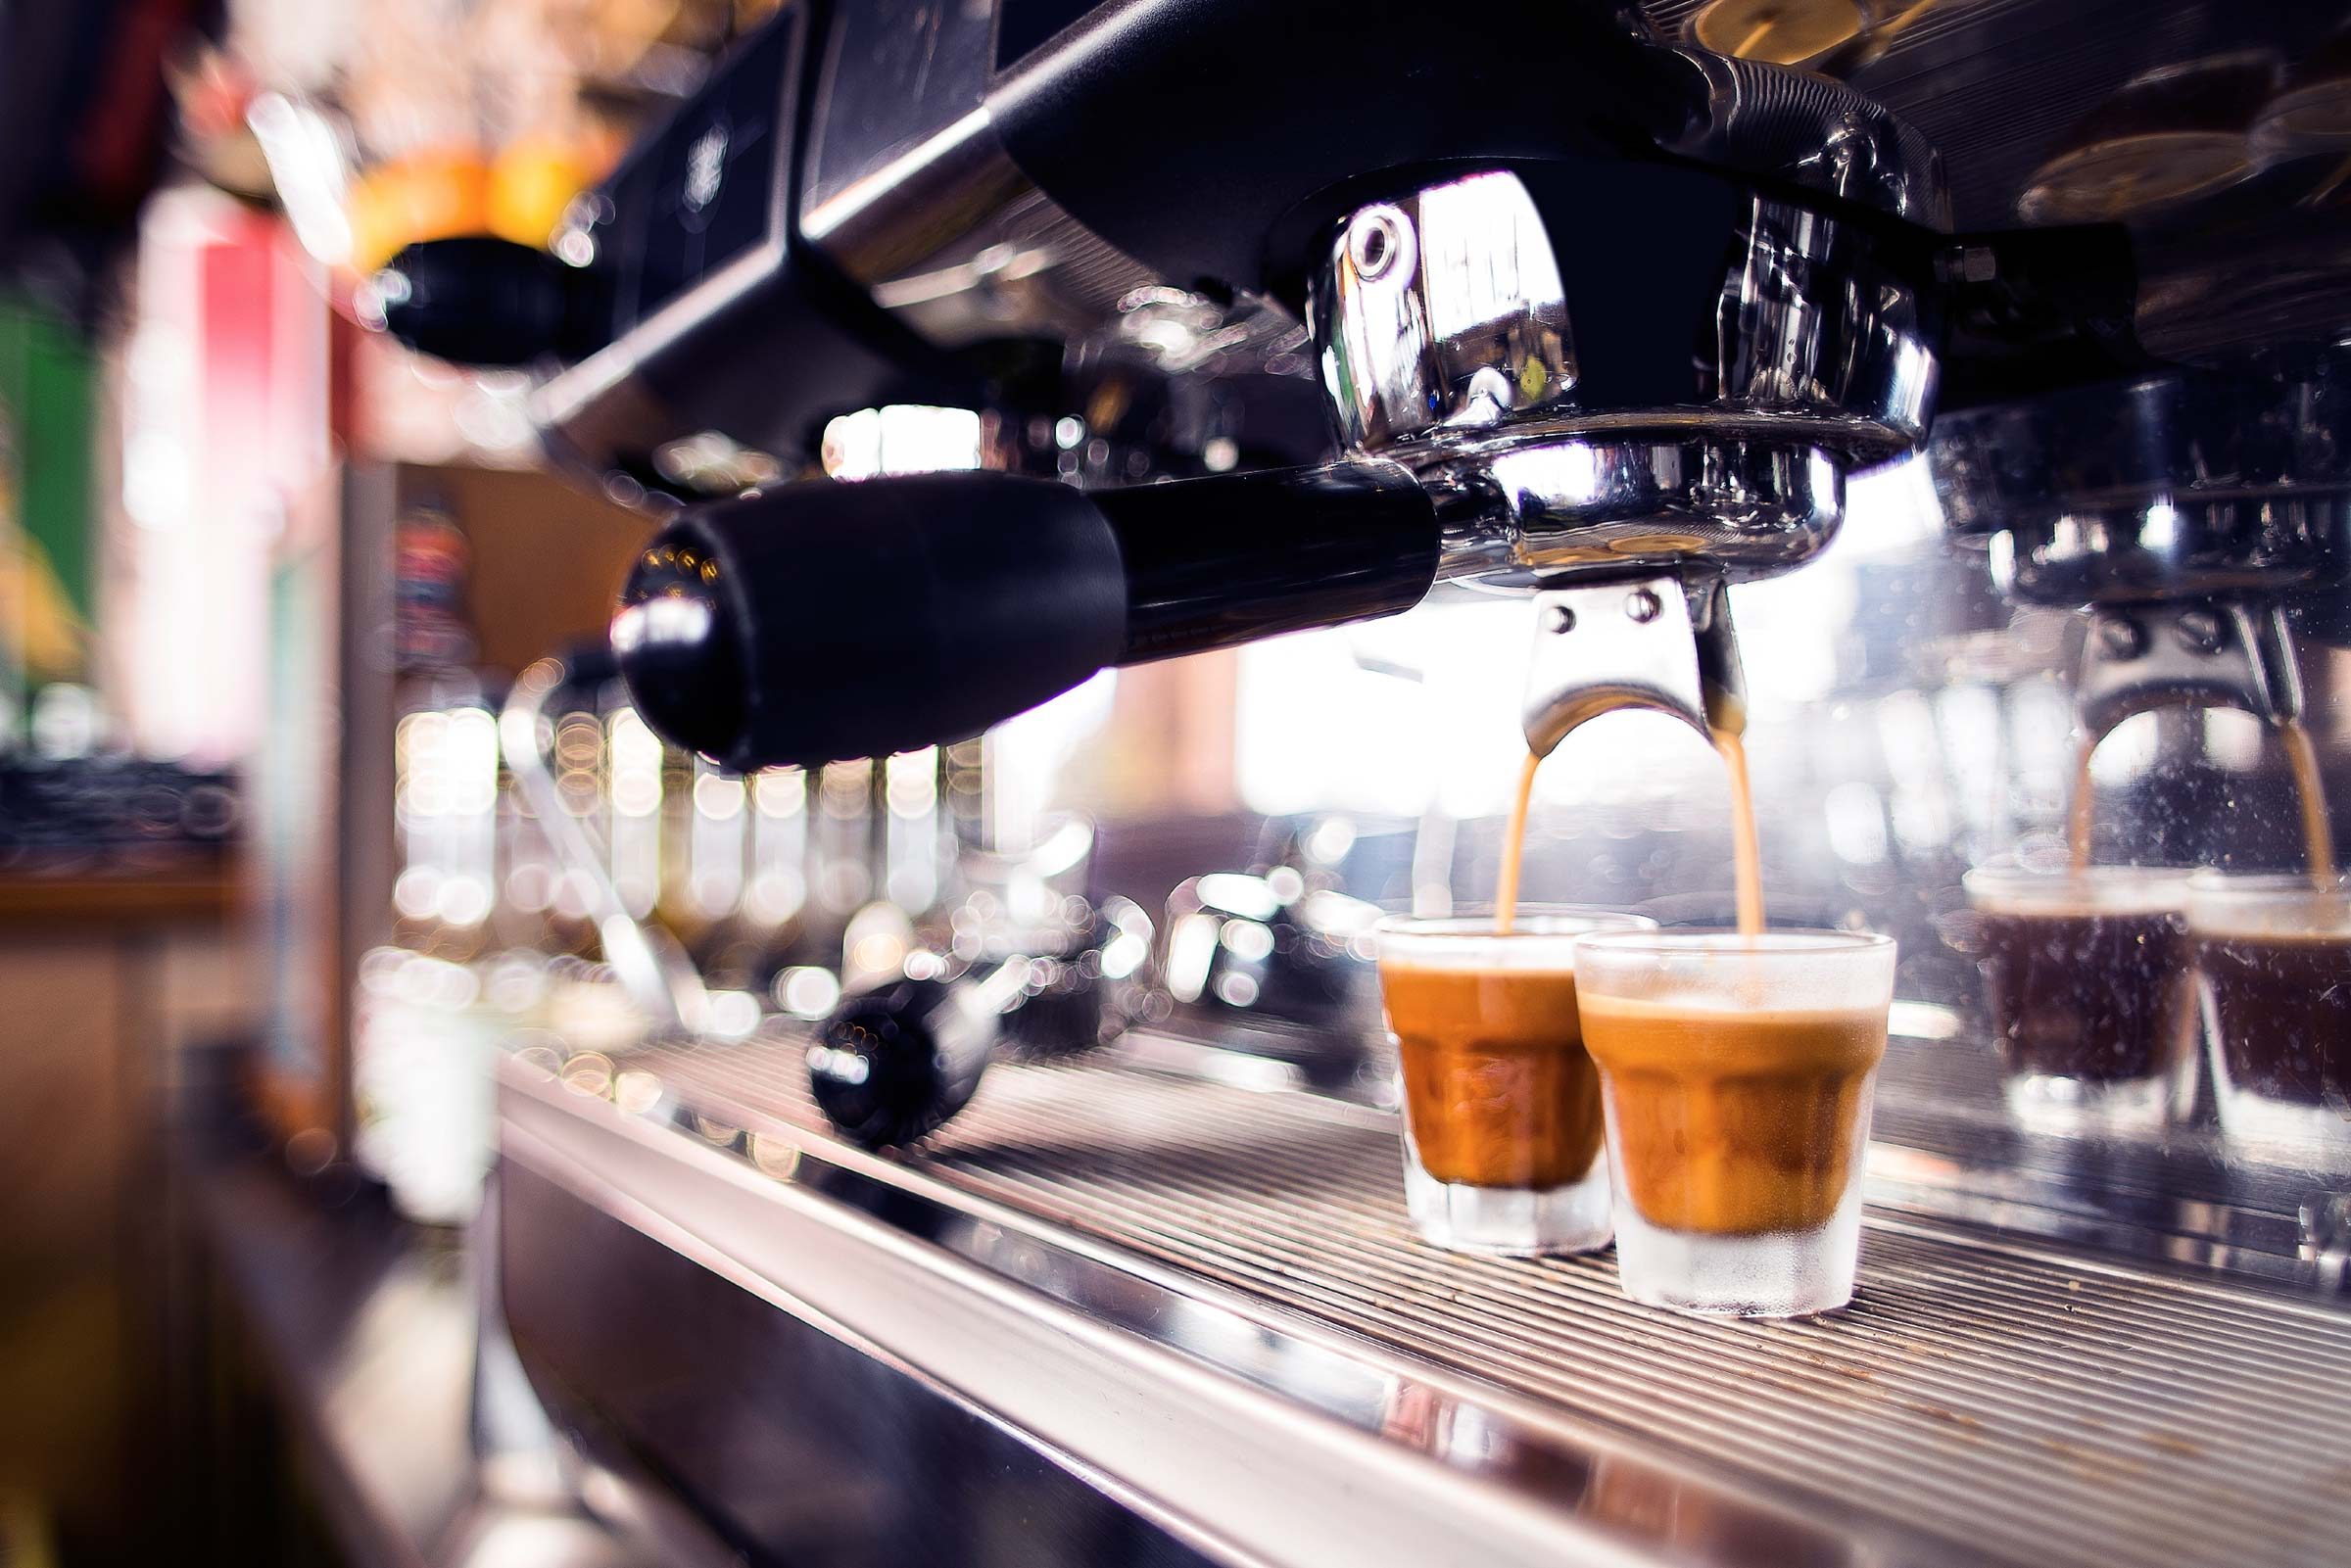 things baristas won't tell you | reader's digest